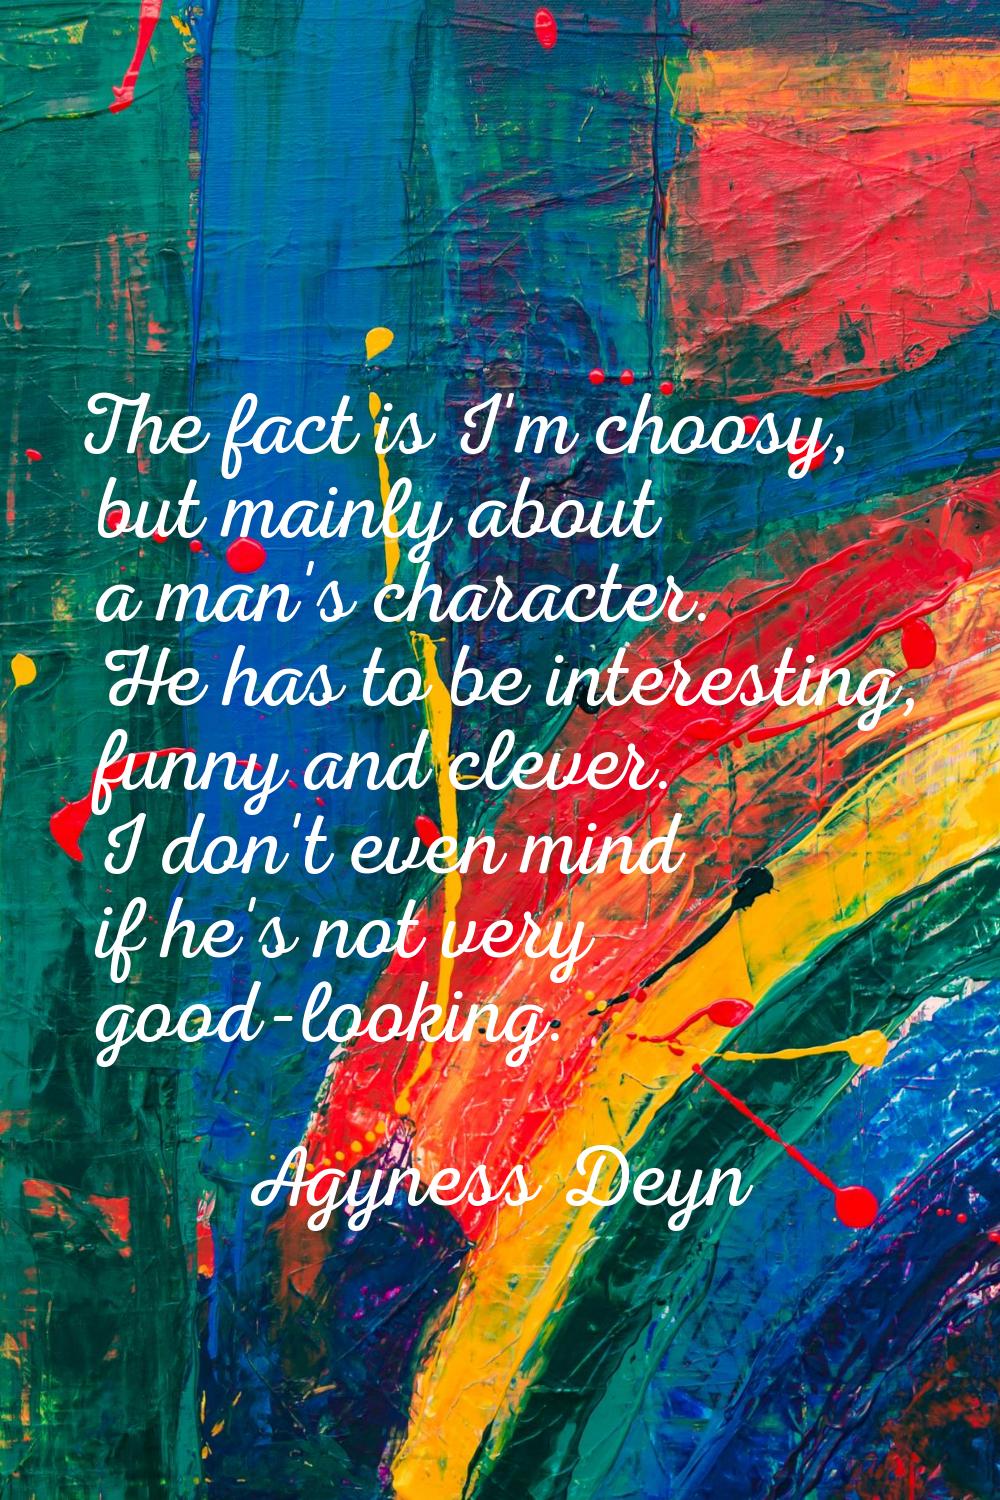 The fact is I'm choosy, but mainly about a man's character. He has to be interesting, funny and cle